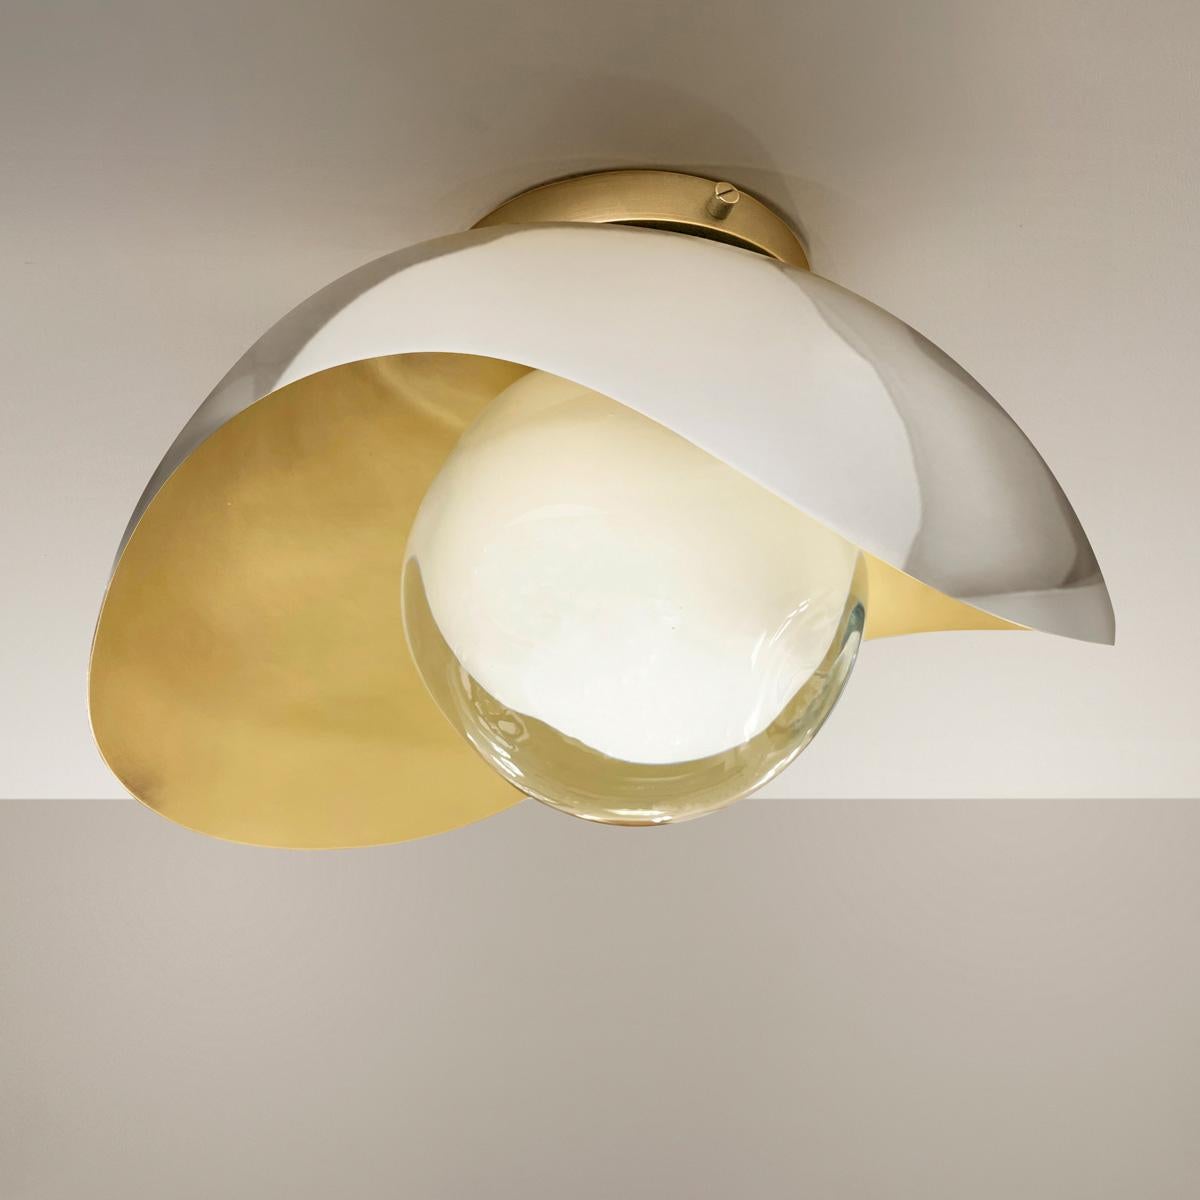 Contemporary Perla Flushmount Ceiling Light by Gaspare Asaro-Brass Finish For Sale